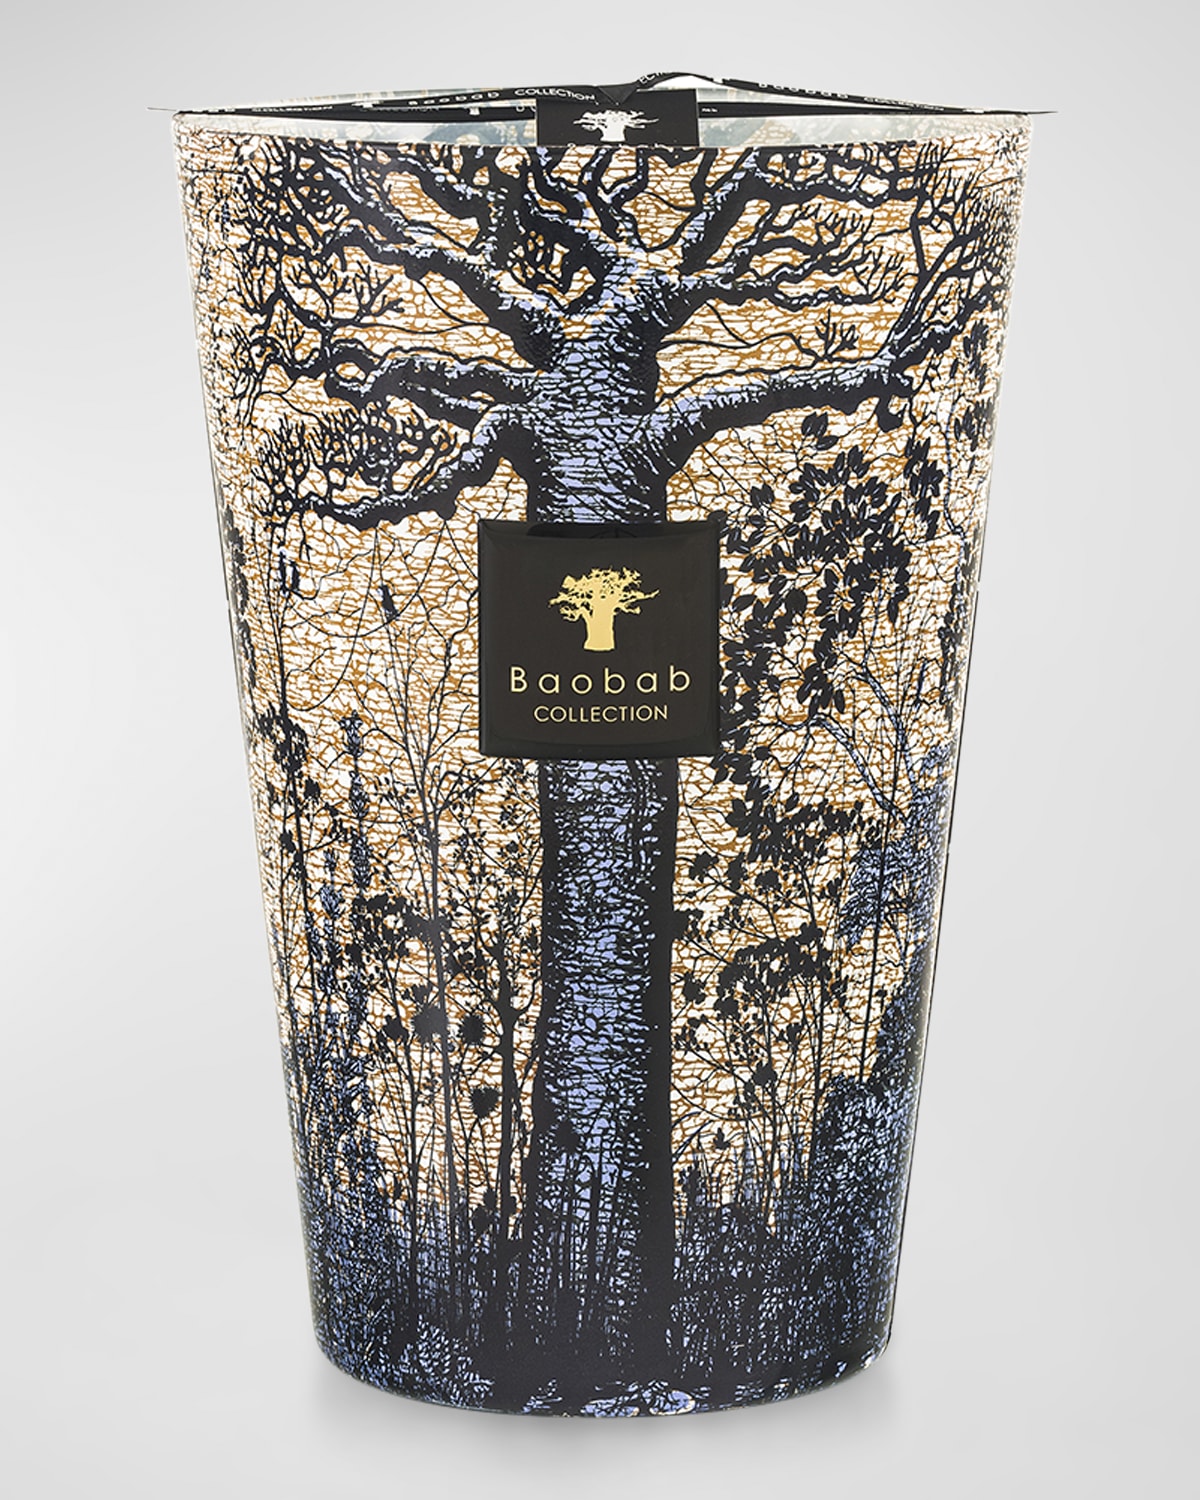 Baobab Collection Sacred Trees Seguela 7-wick Max35 Candle, 352.7 Oz.